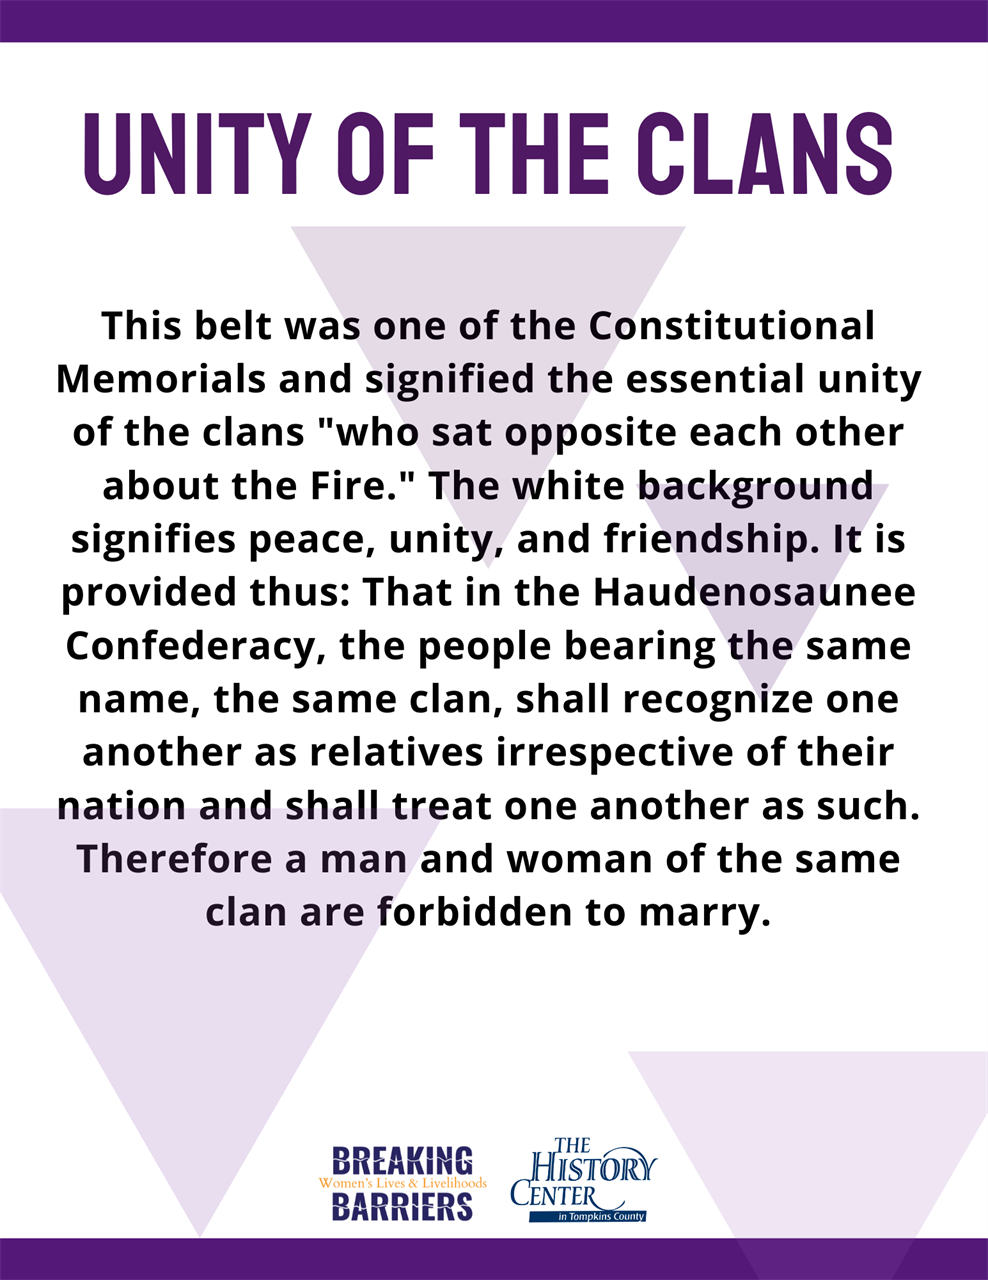 Unity of the Clans Belt information